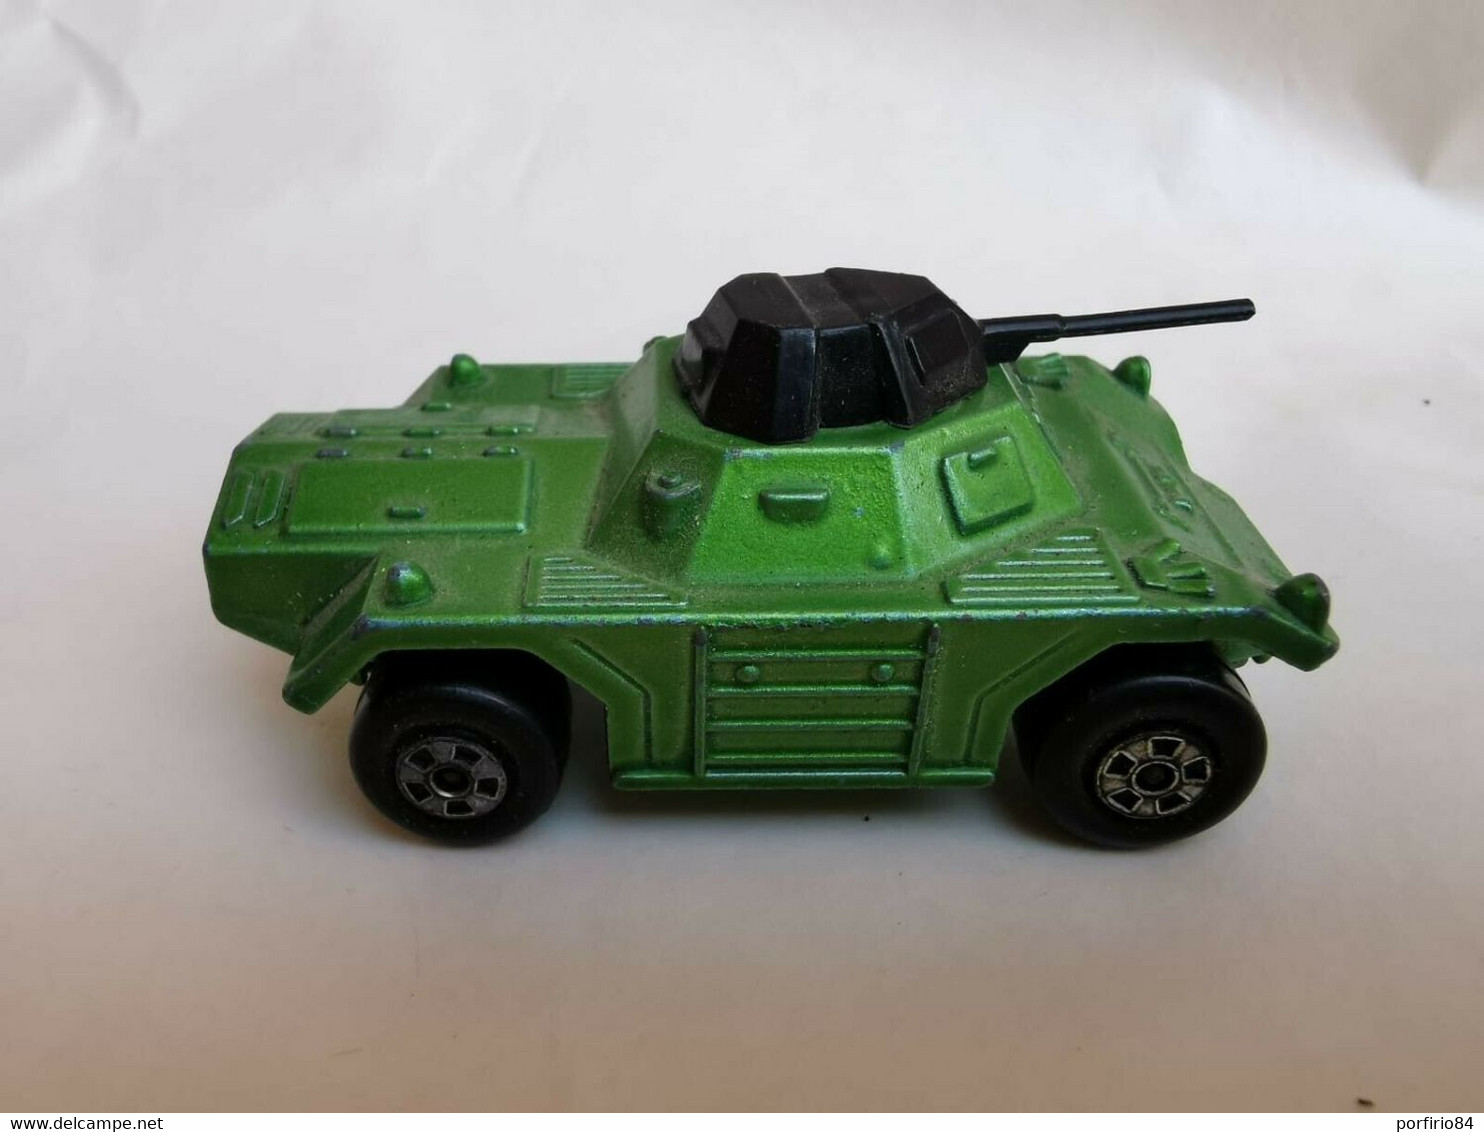 VINTAGE MODELLINO CARRO ARMATO Matchbox 1973 Rola-Matics N.73 WEASEL ARMORED TRUCK   Made In England - Chars